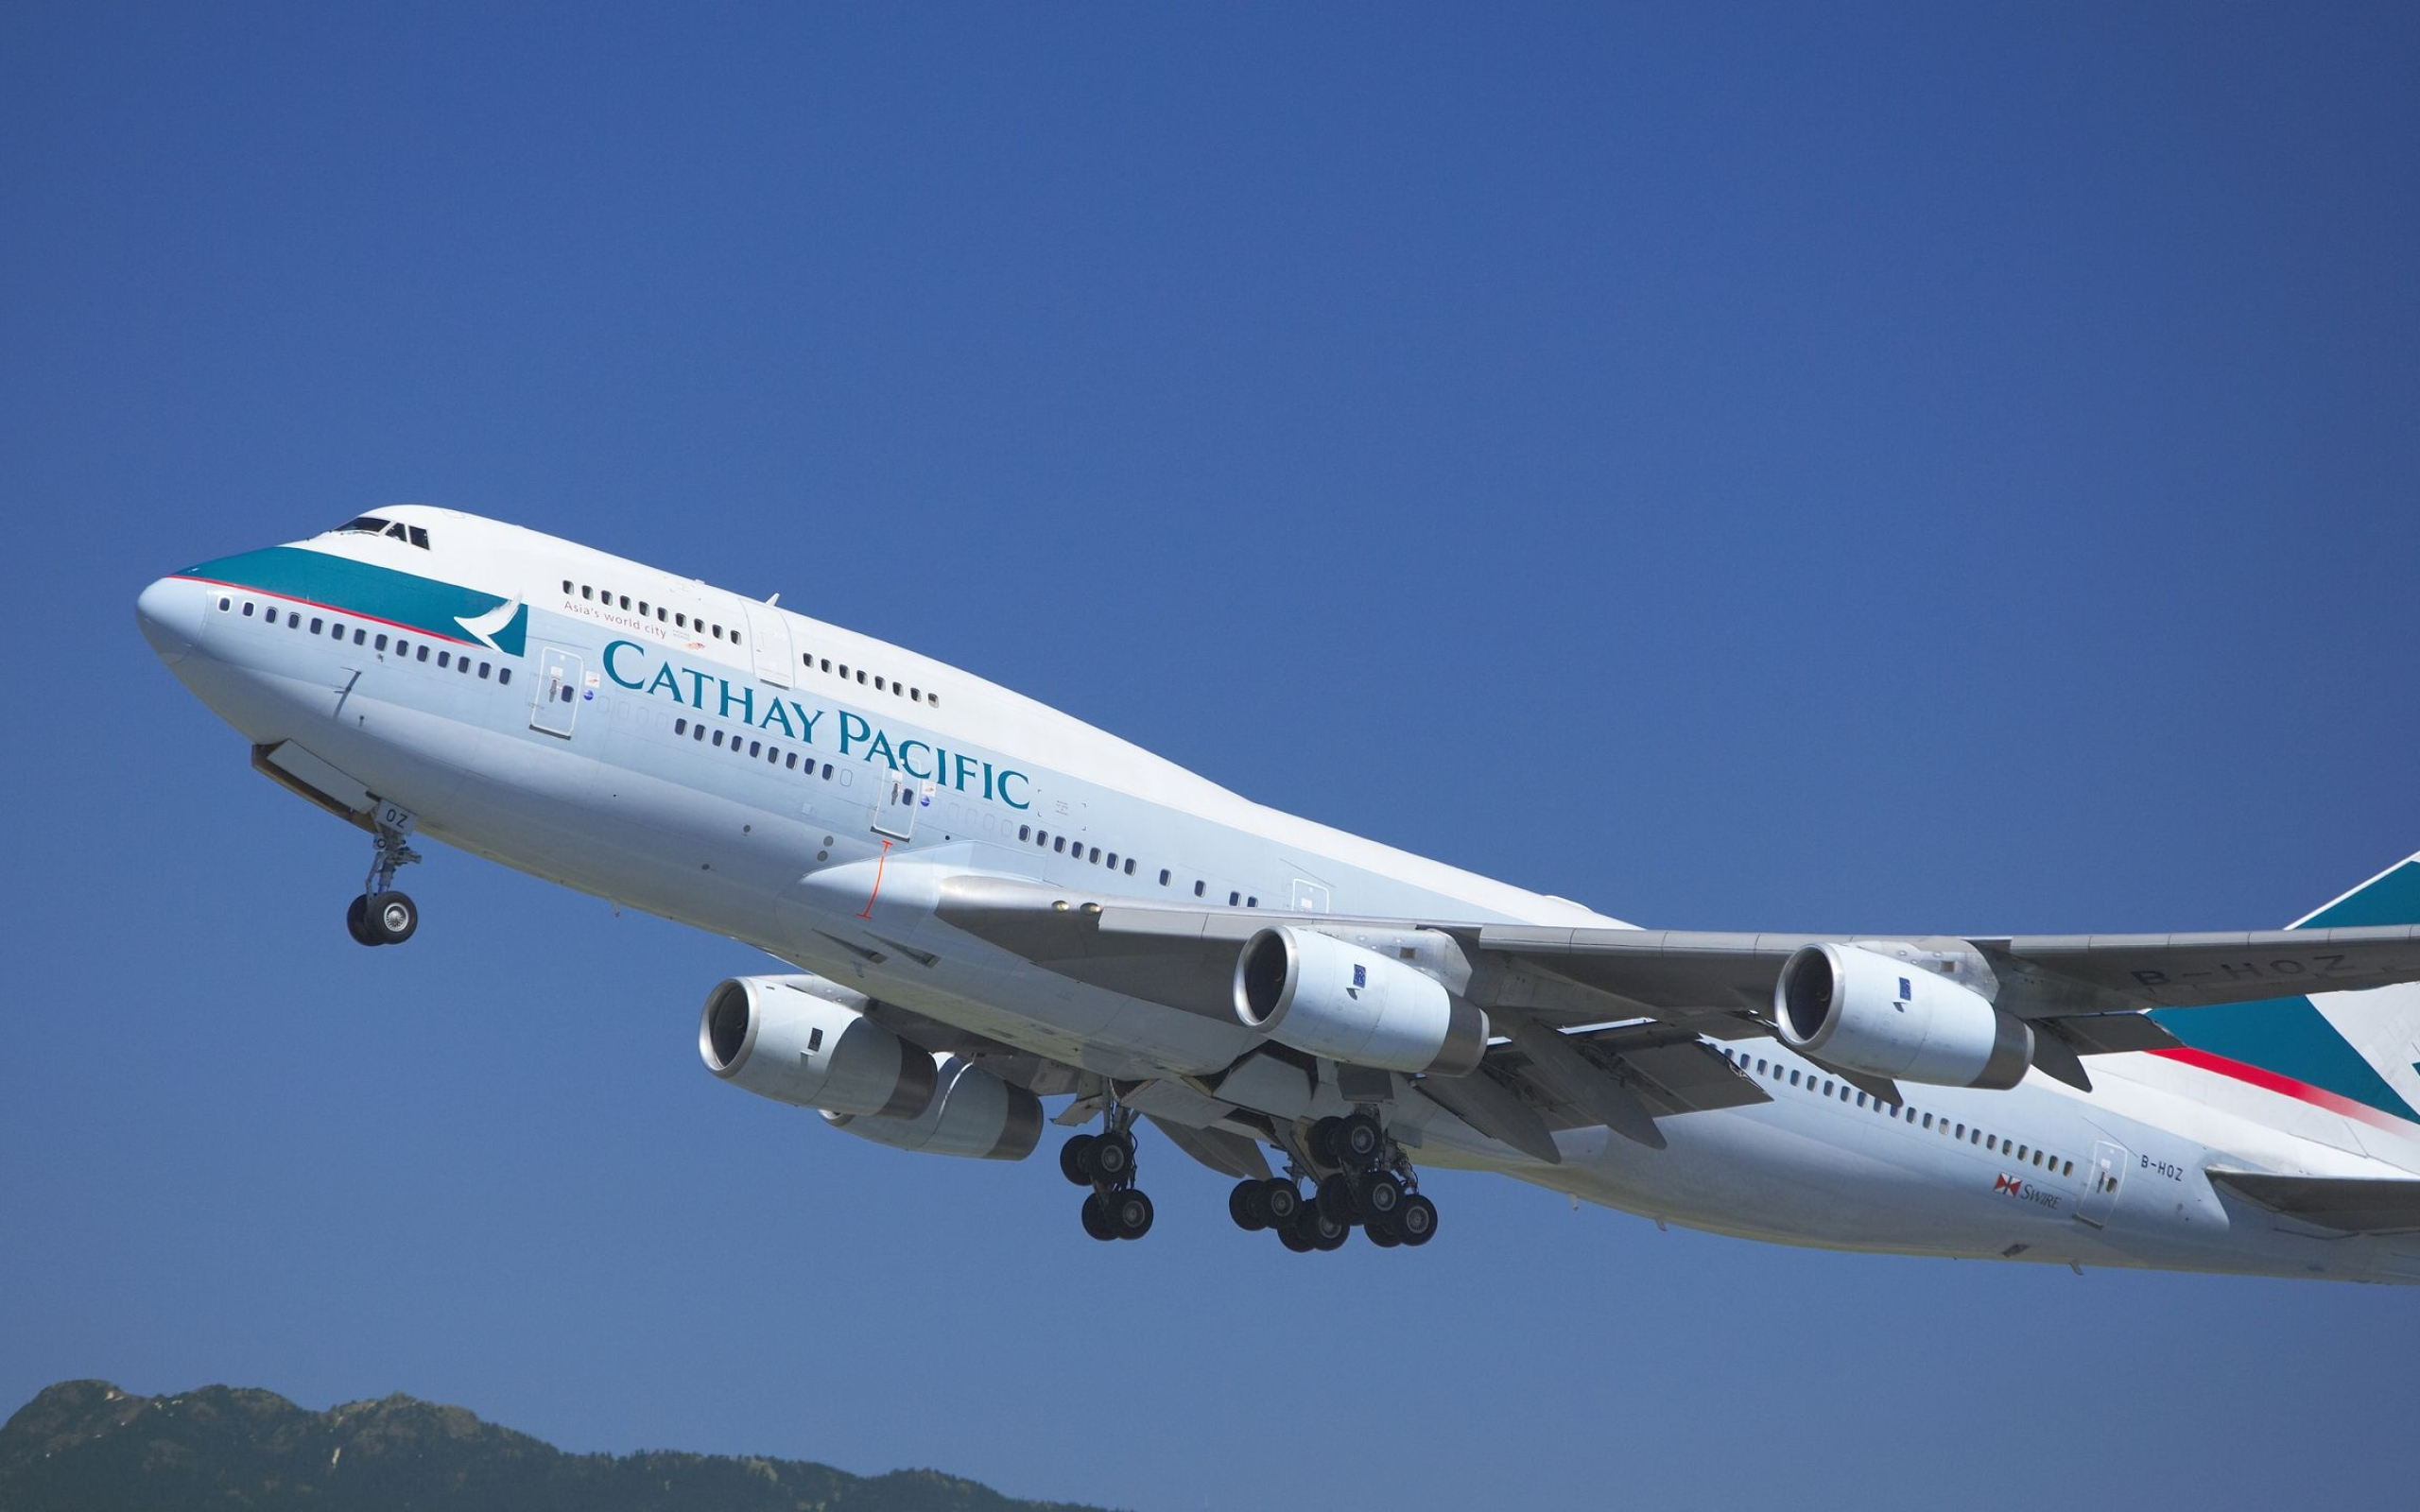 Cathay Pacific, Airline wallpapers, Travel inspiration, Wanderlust vibes, 2560x1600 HD Desktop